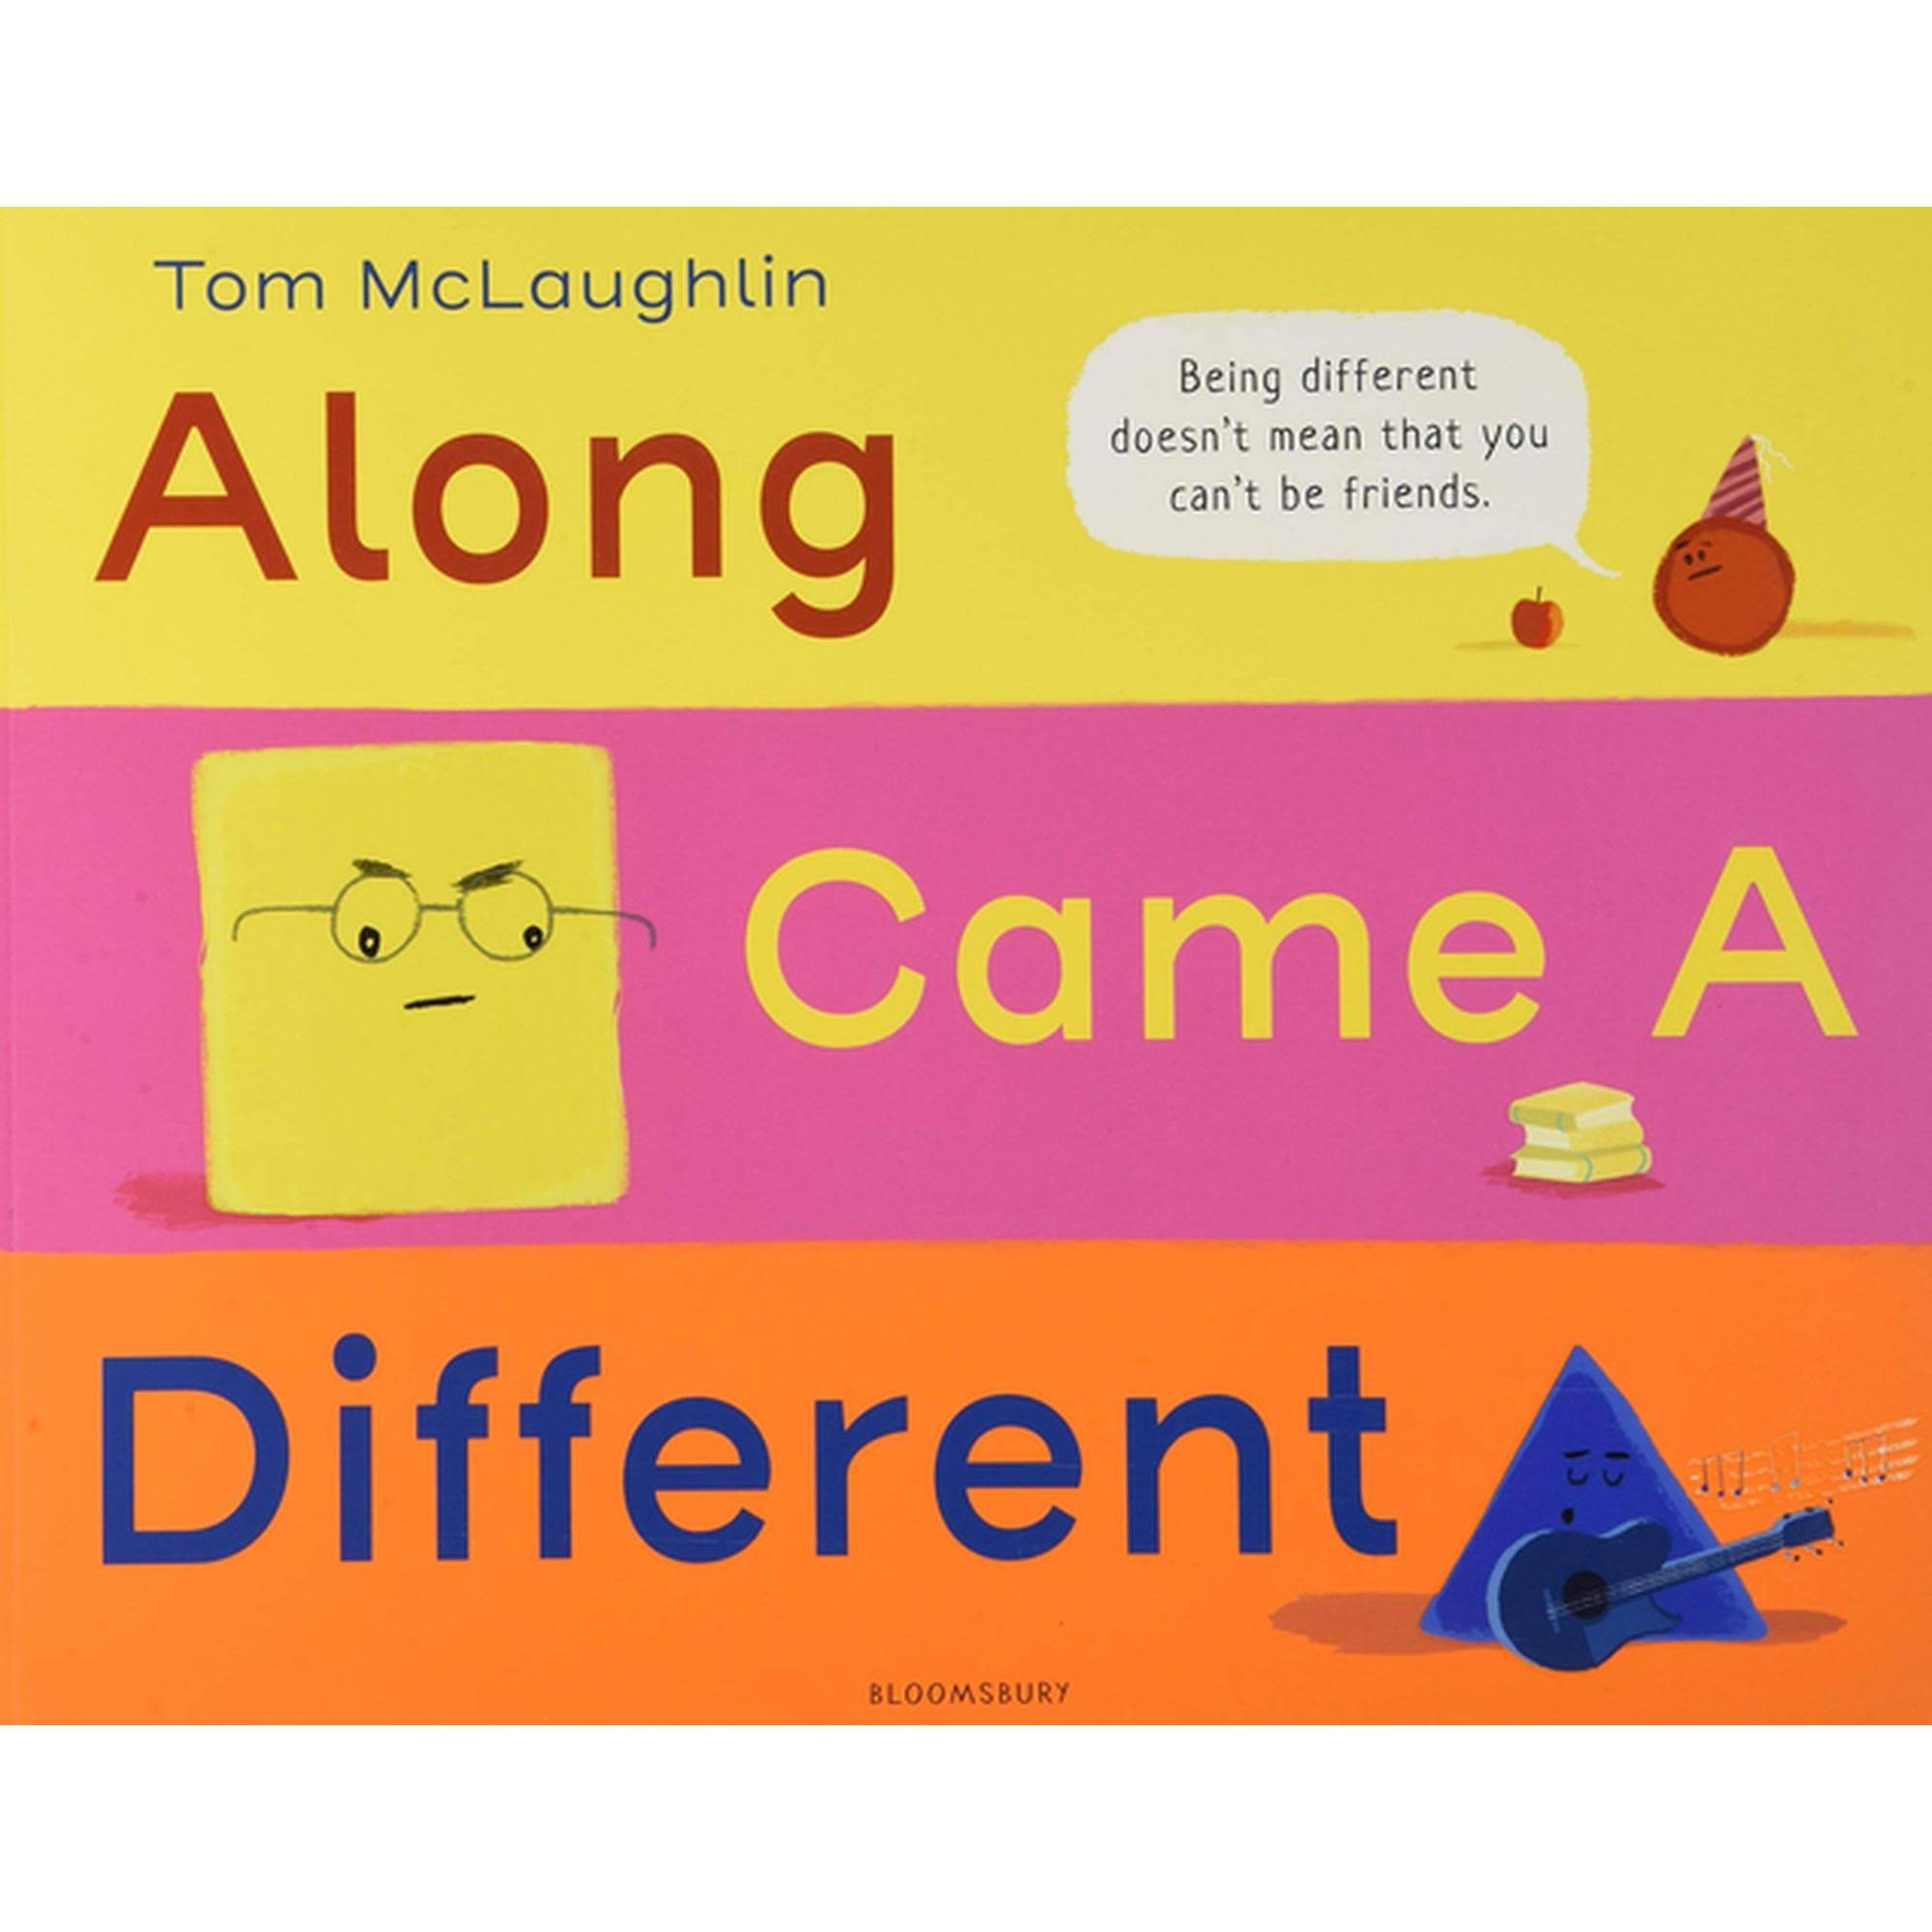 Along Came a Different [Book]